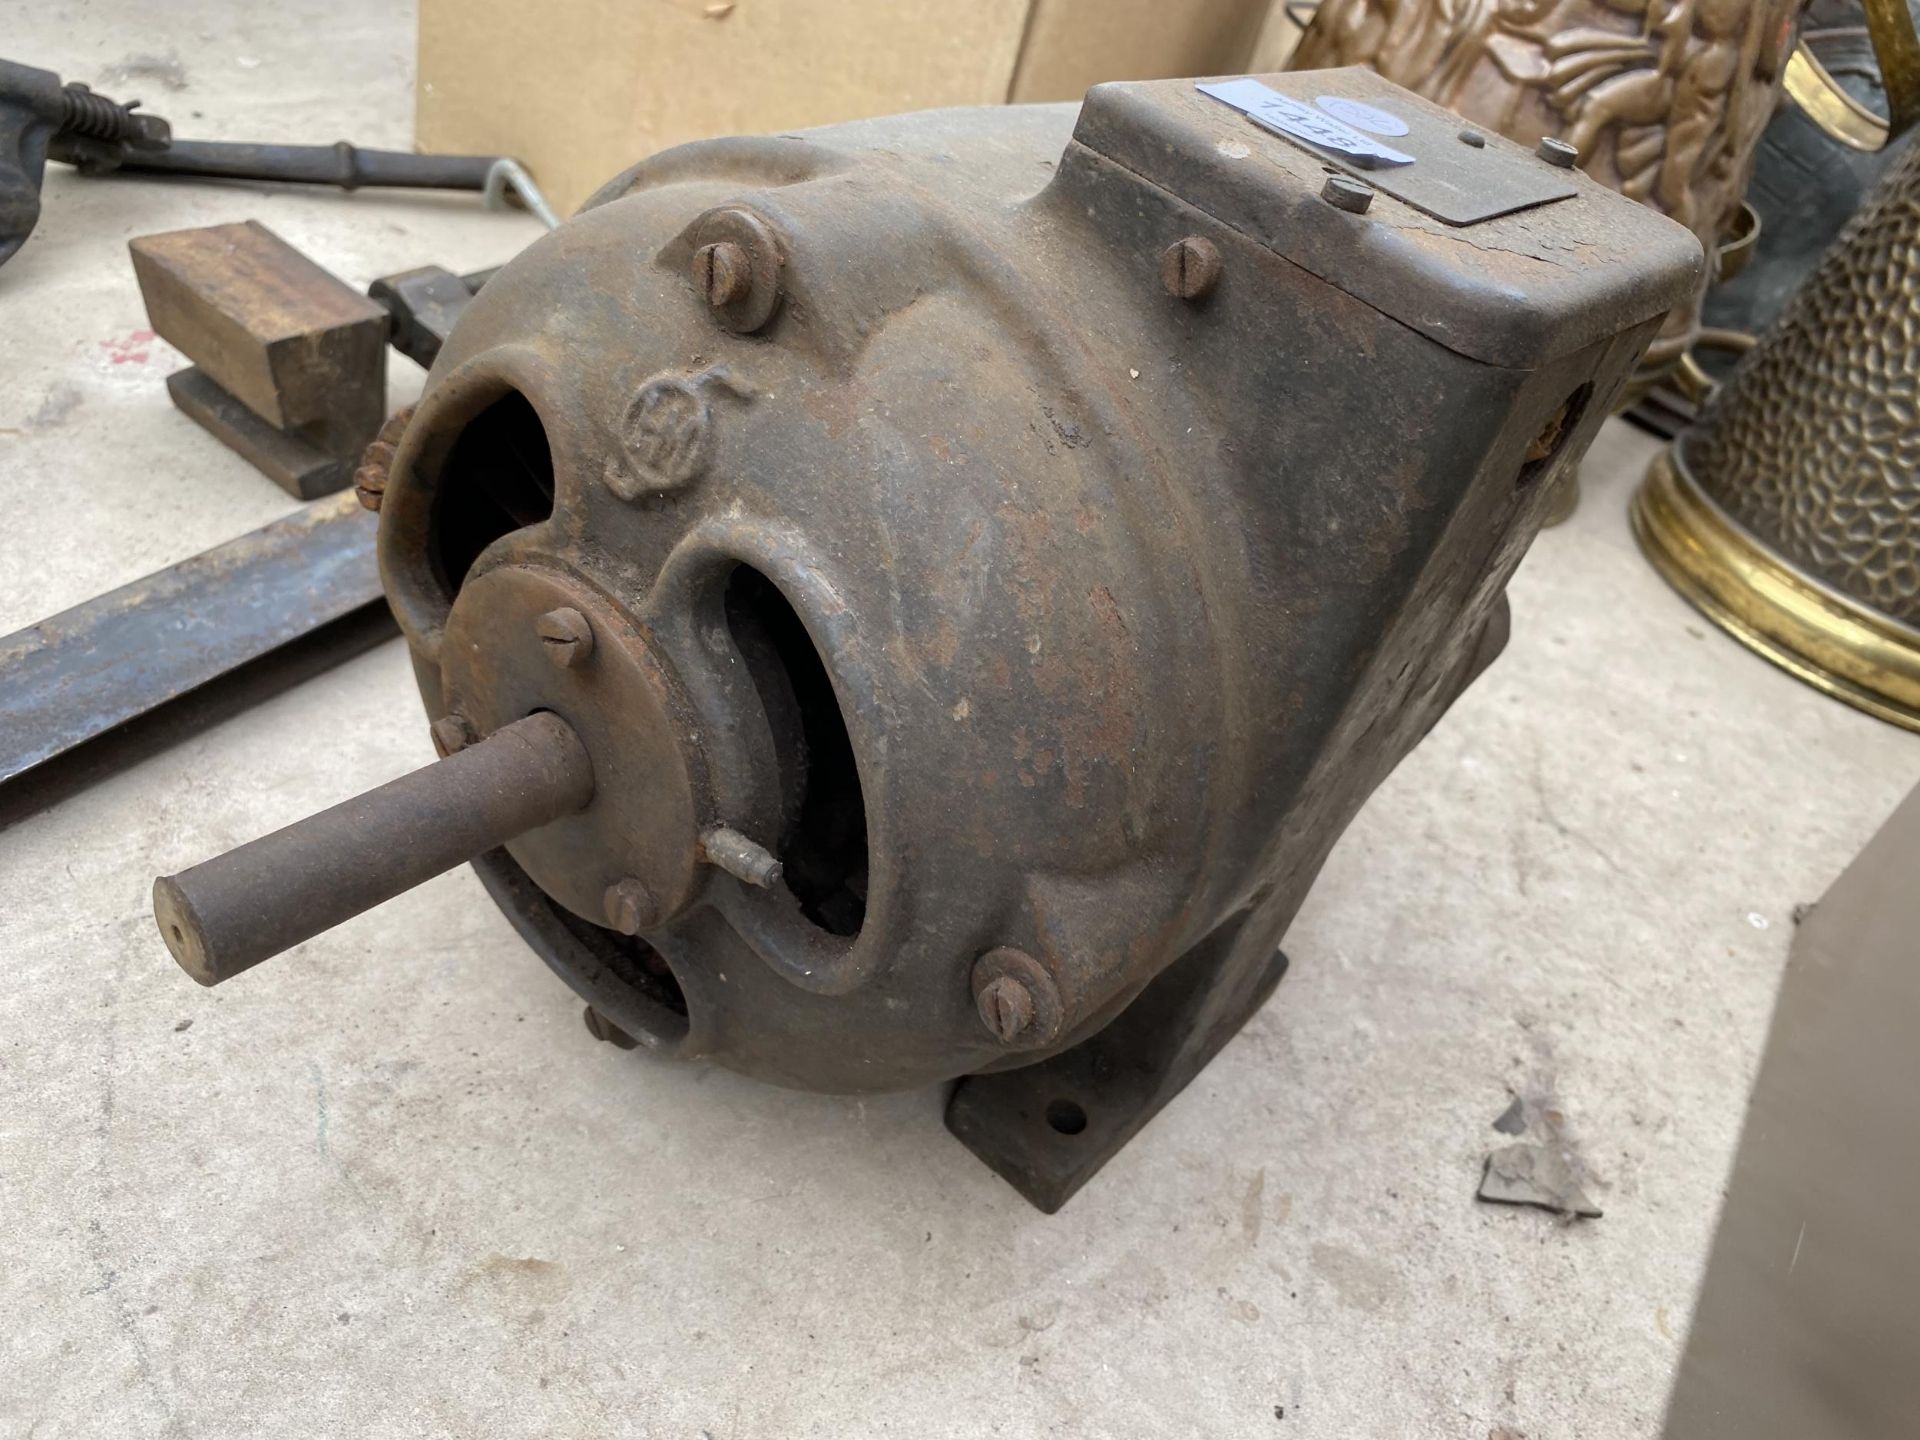 A LARGE INDUSTRIAL MOTOR, A G CLAMP AND A PARAFIN BLOW TORCH ETC - Image 2 of 3